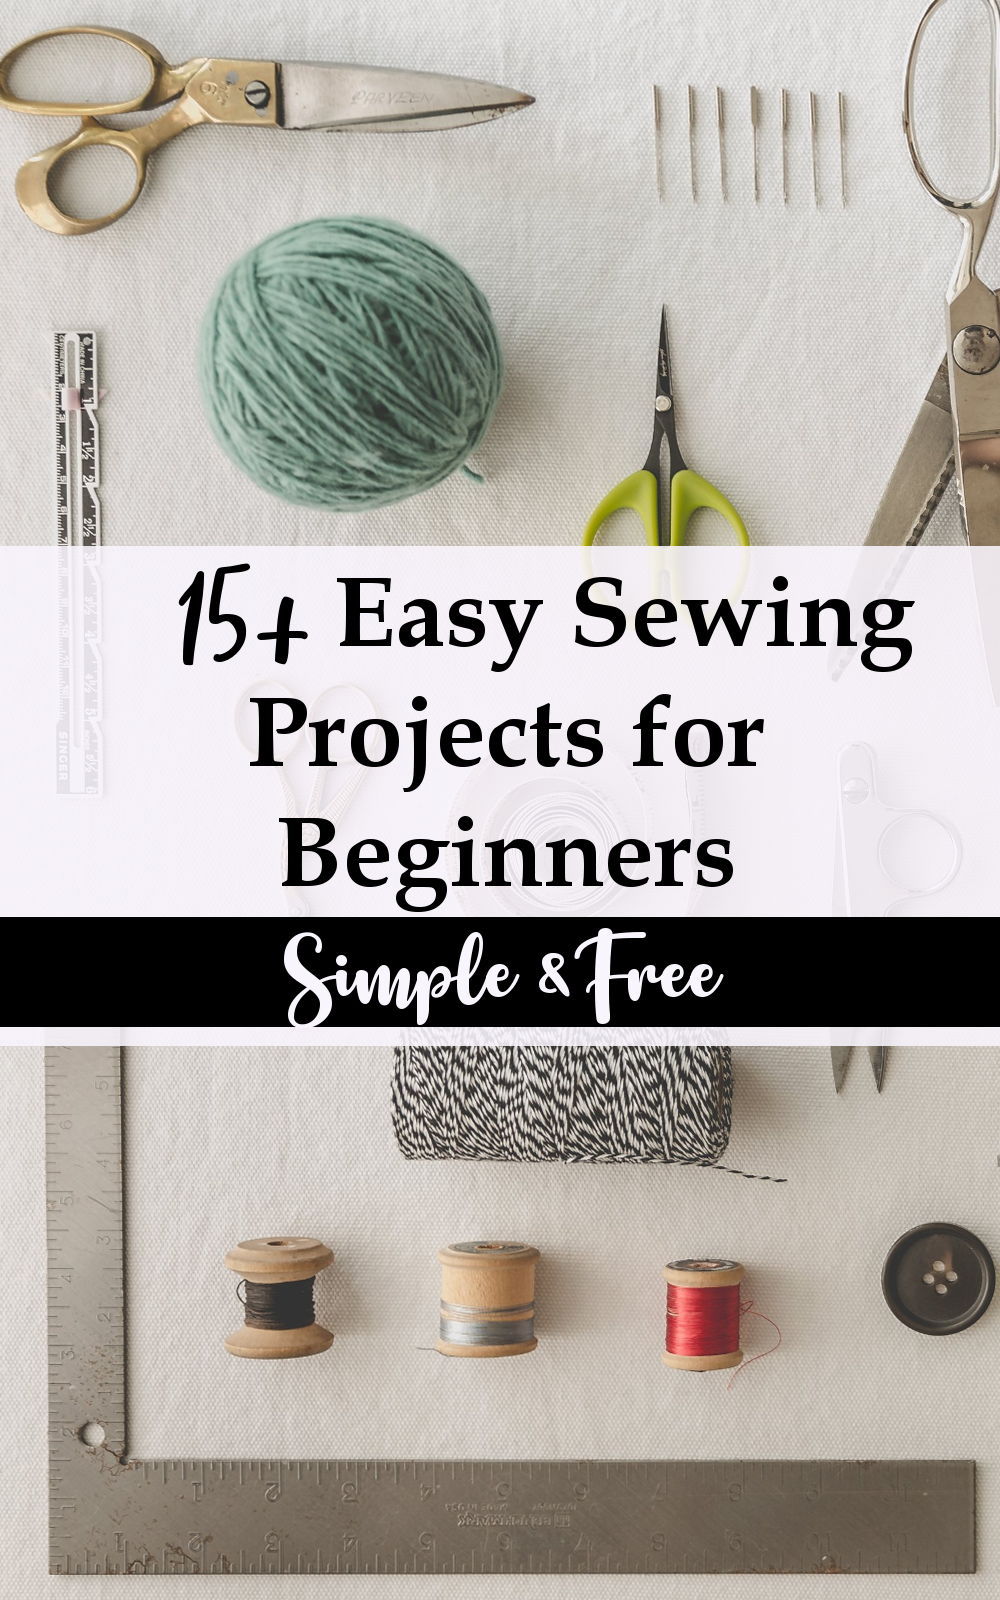 24+ Inspired Photo of Easy Sewing Patterns For Beginners ...